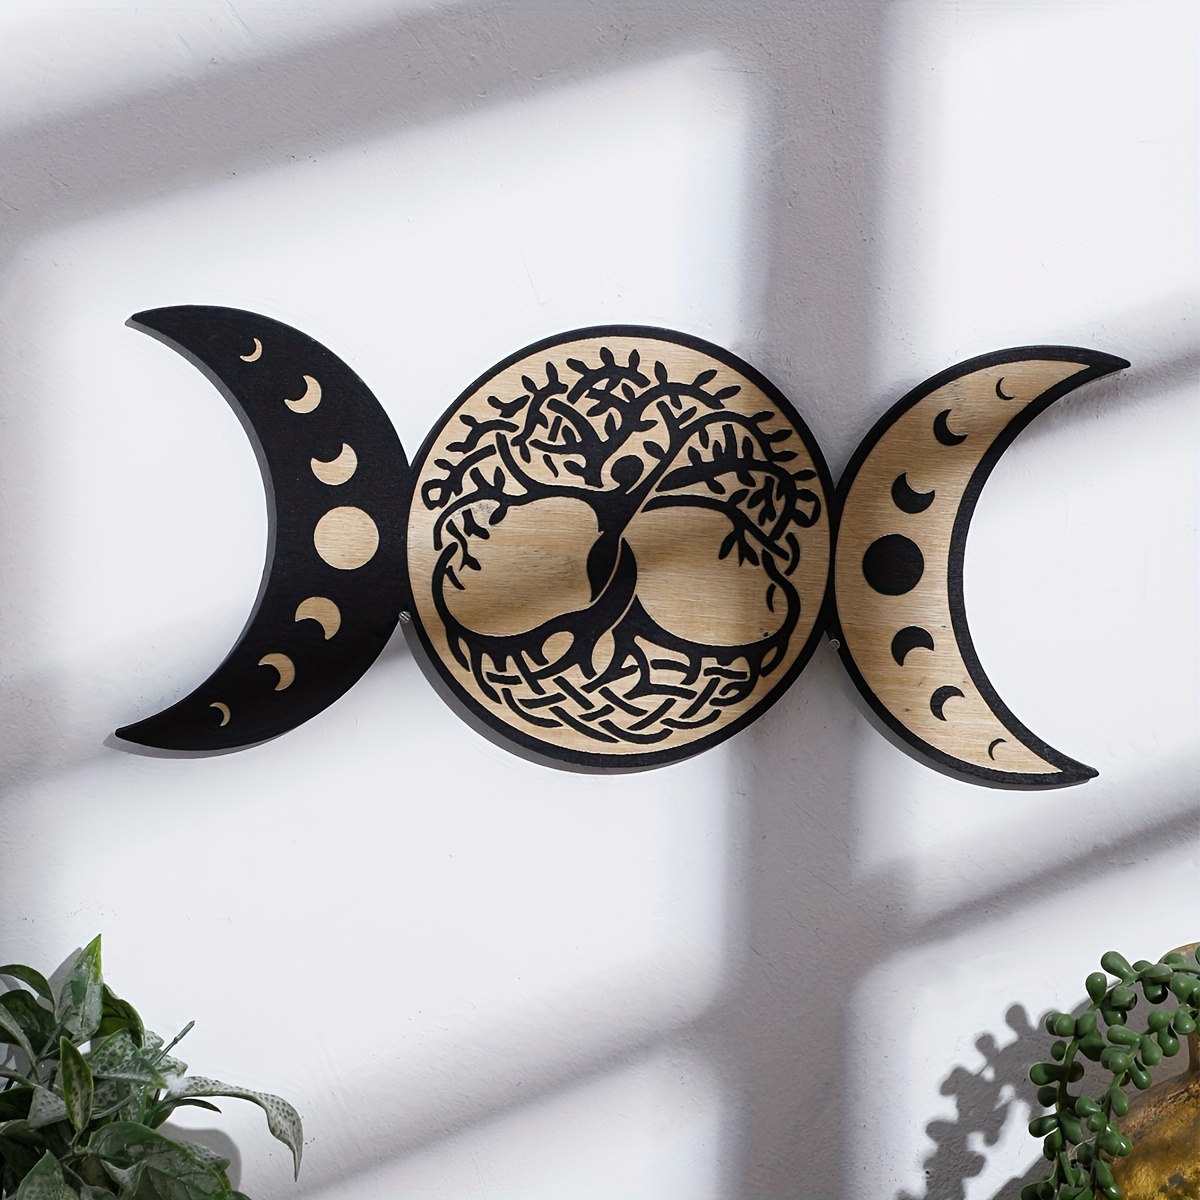 1pc Natural Crystal Wall Hanging, Elegant Moon & Star Design Hanging  Decoration For Home